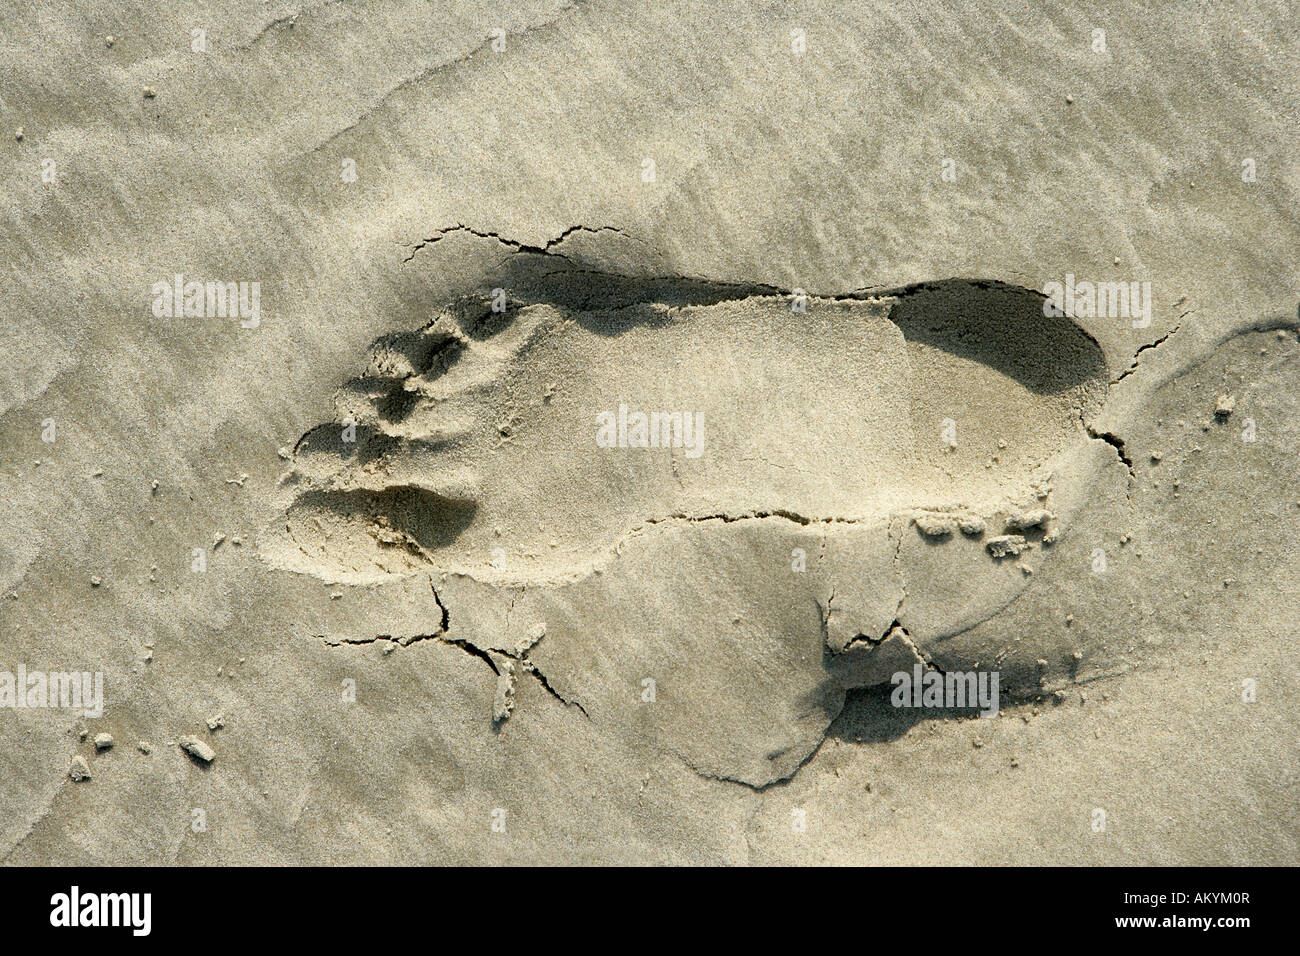 Footprint in the sand Stock Photo